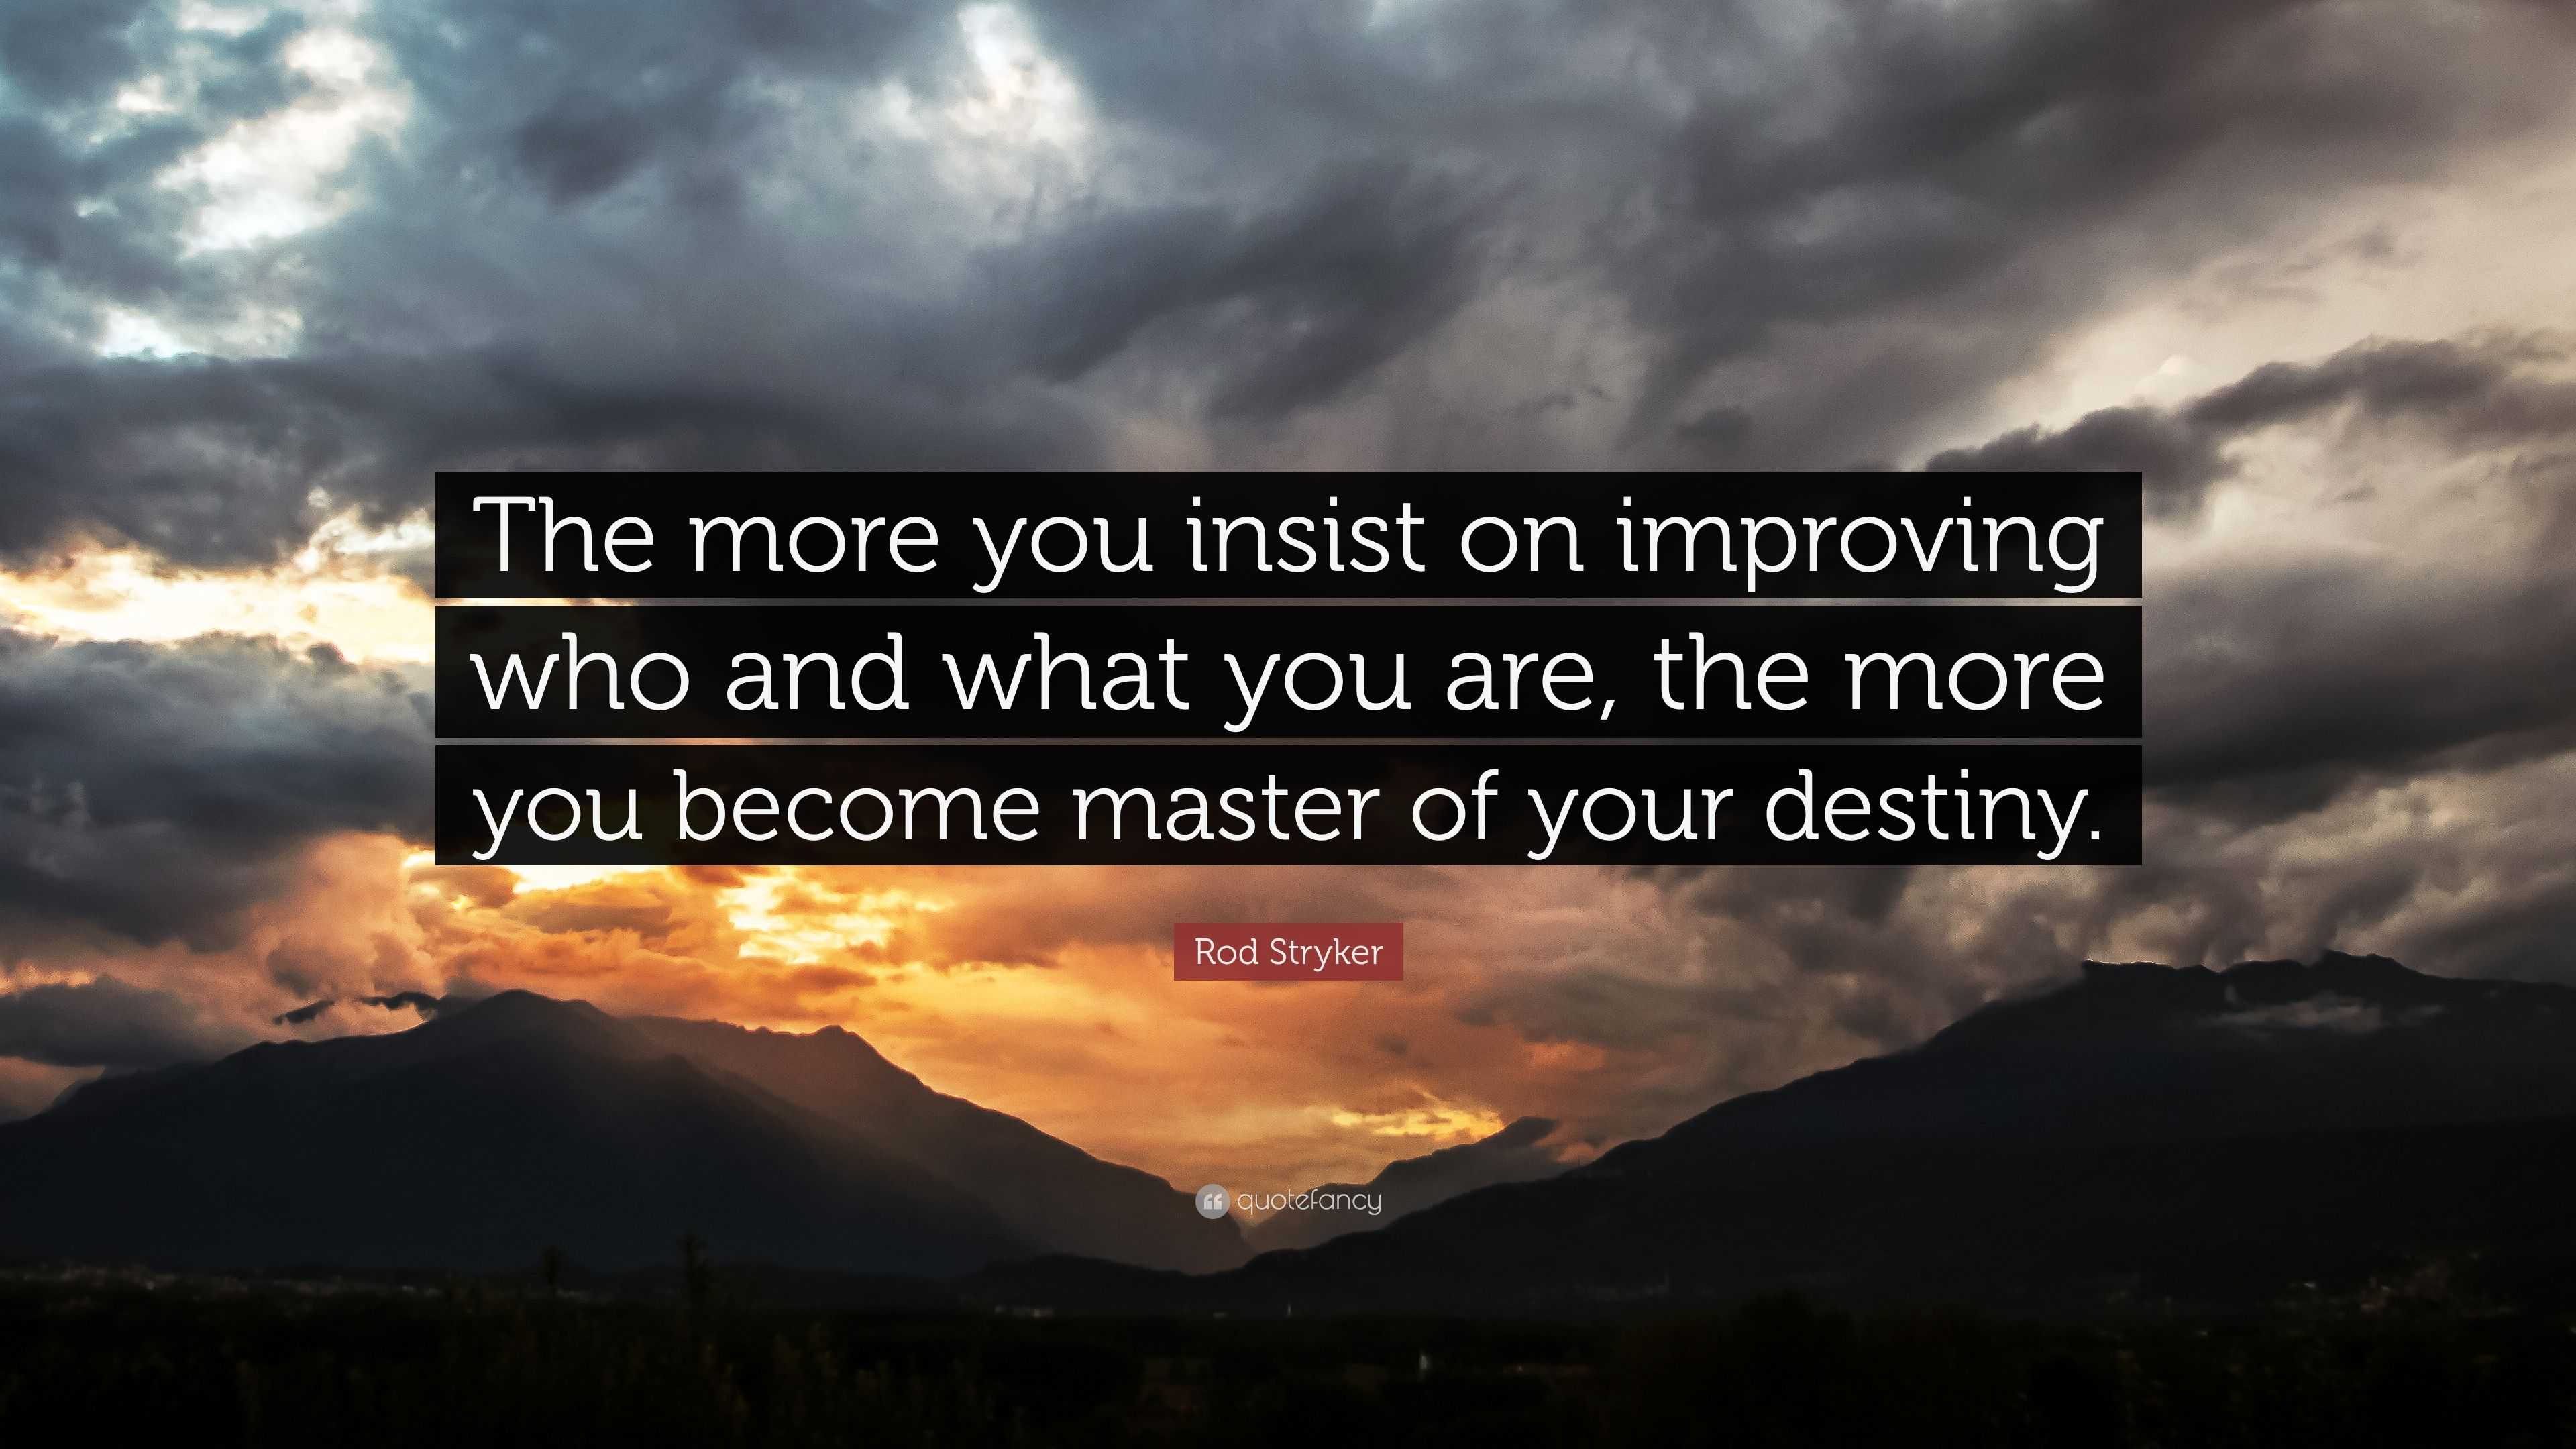 Rod Stryker Quote: “The more you insist on improving who and what you ...